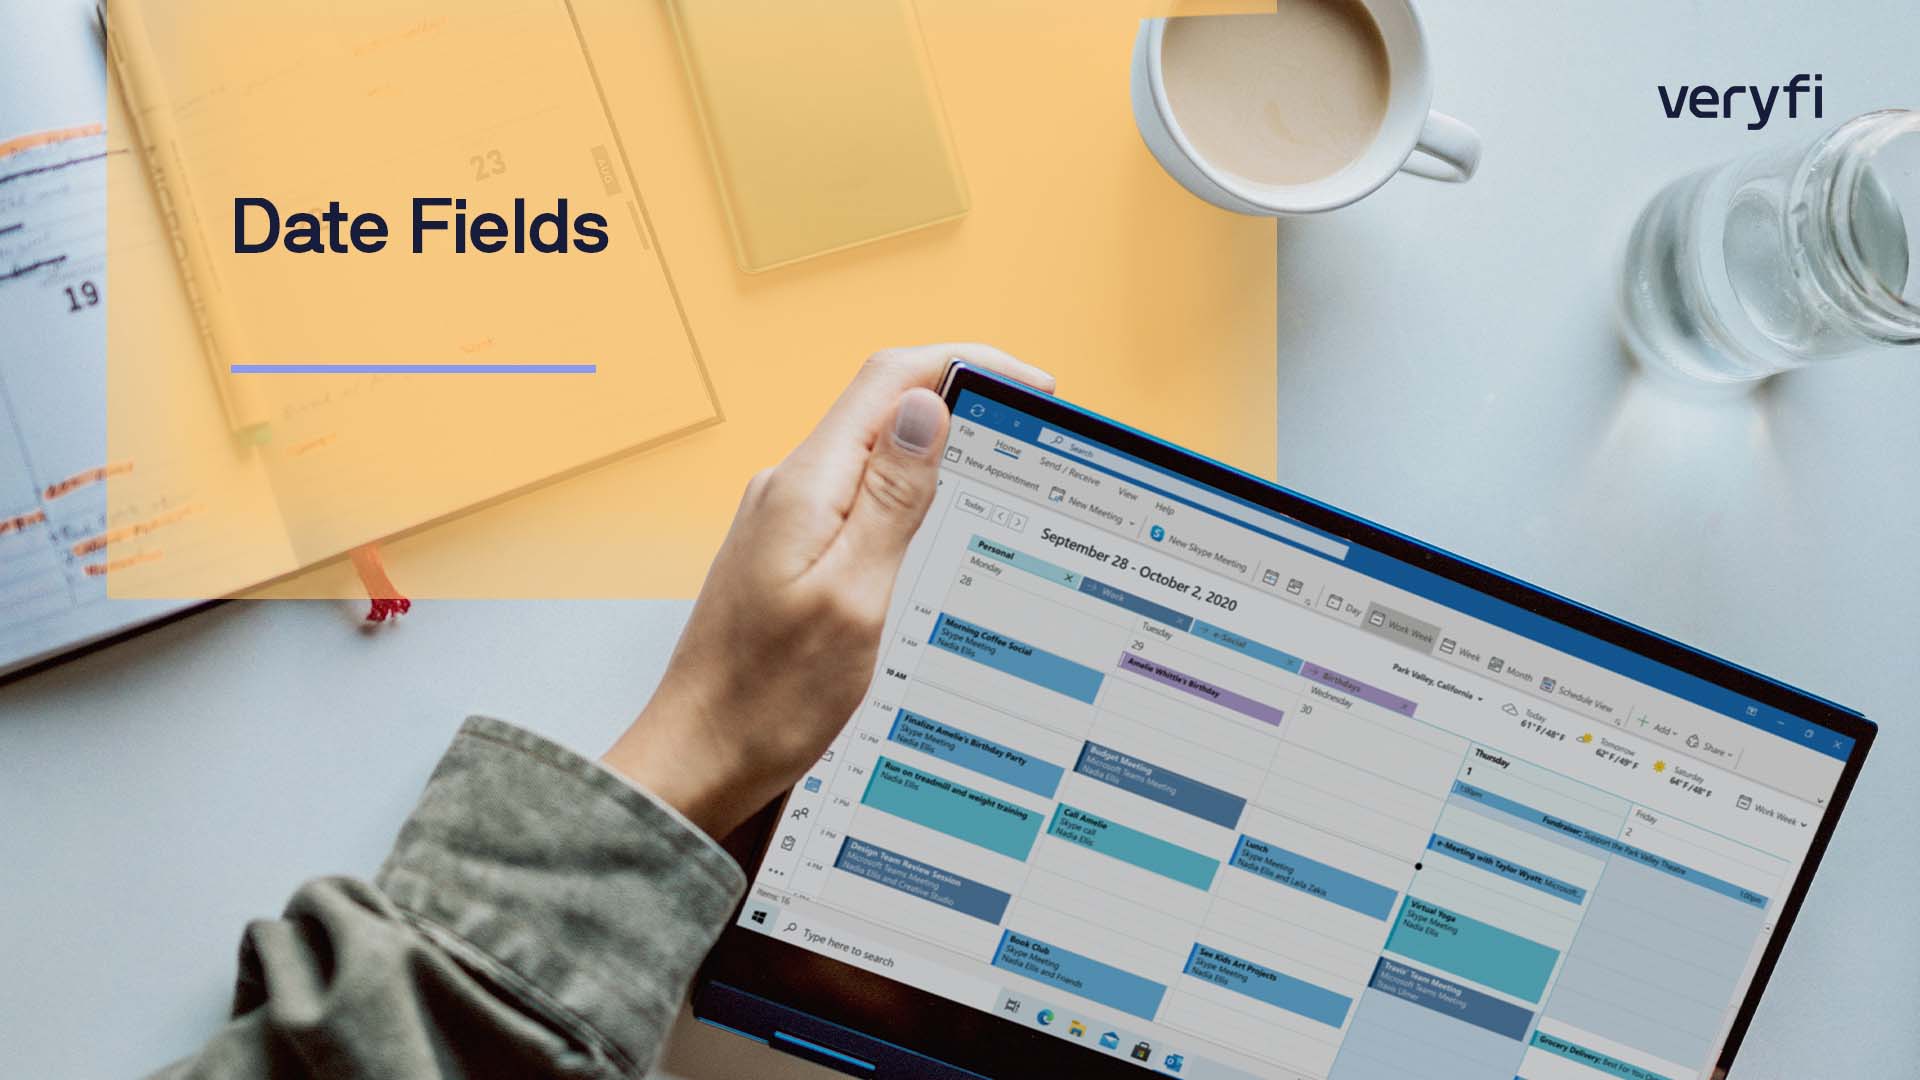 Date fields provide valuable information related to financial transactions, order processing, logistics, customer experience, and service management.